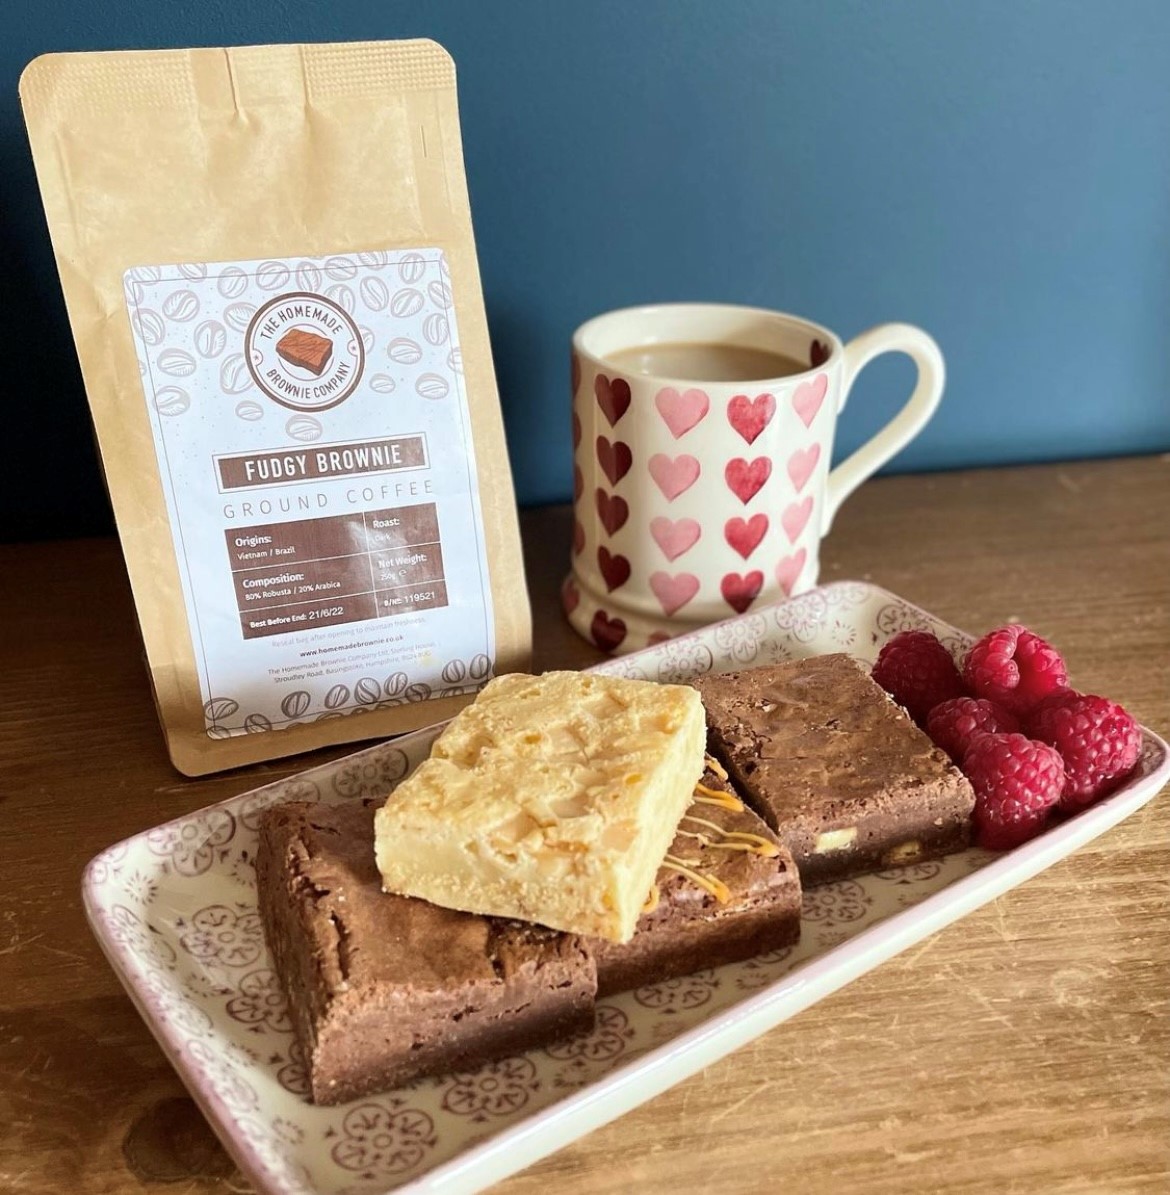 A tray of brownies with raspberries, a mug and a pouch of coffee.